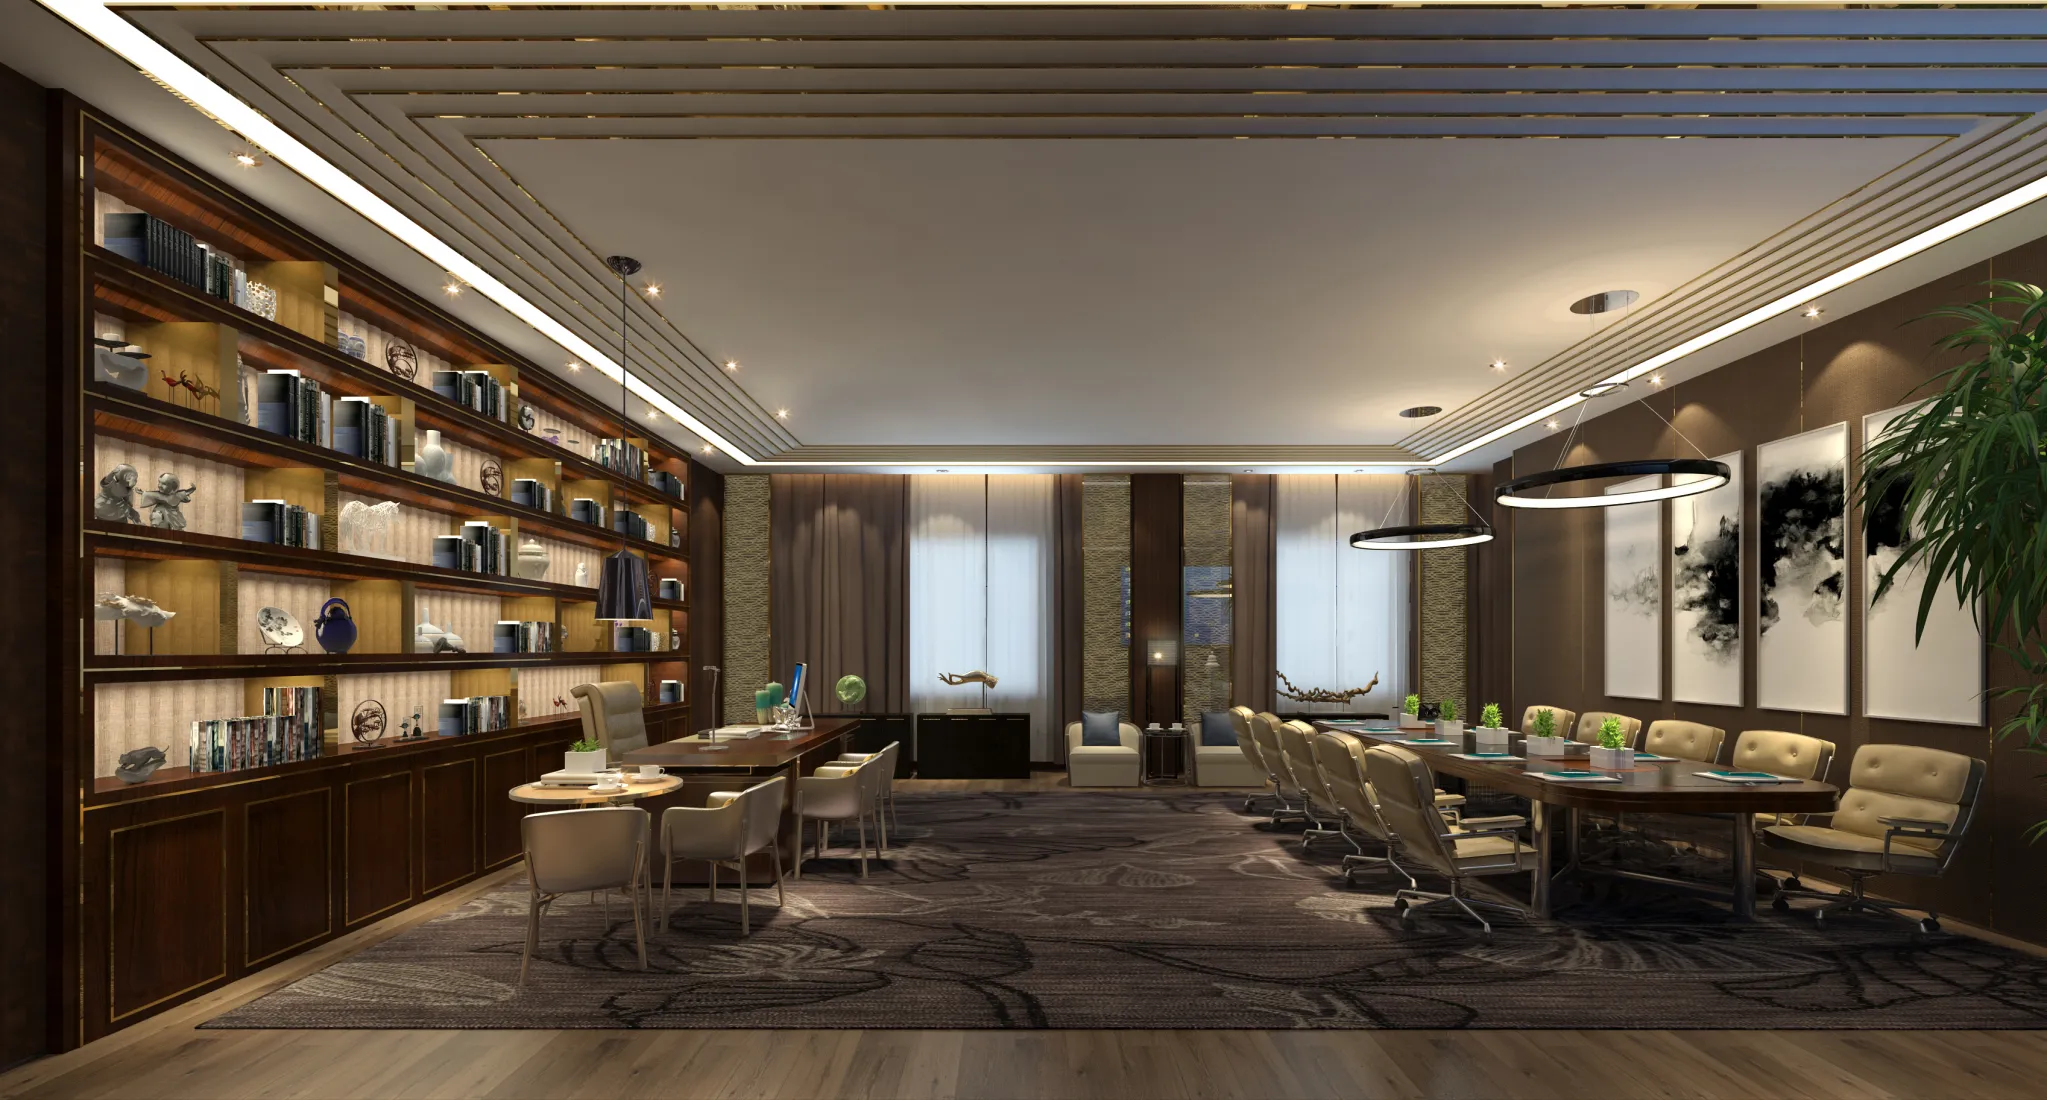 TZ INTERIOR DESIGN 2021 (VRAY) – 21. MANAGER OFFICE – 06